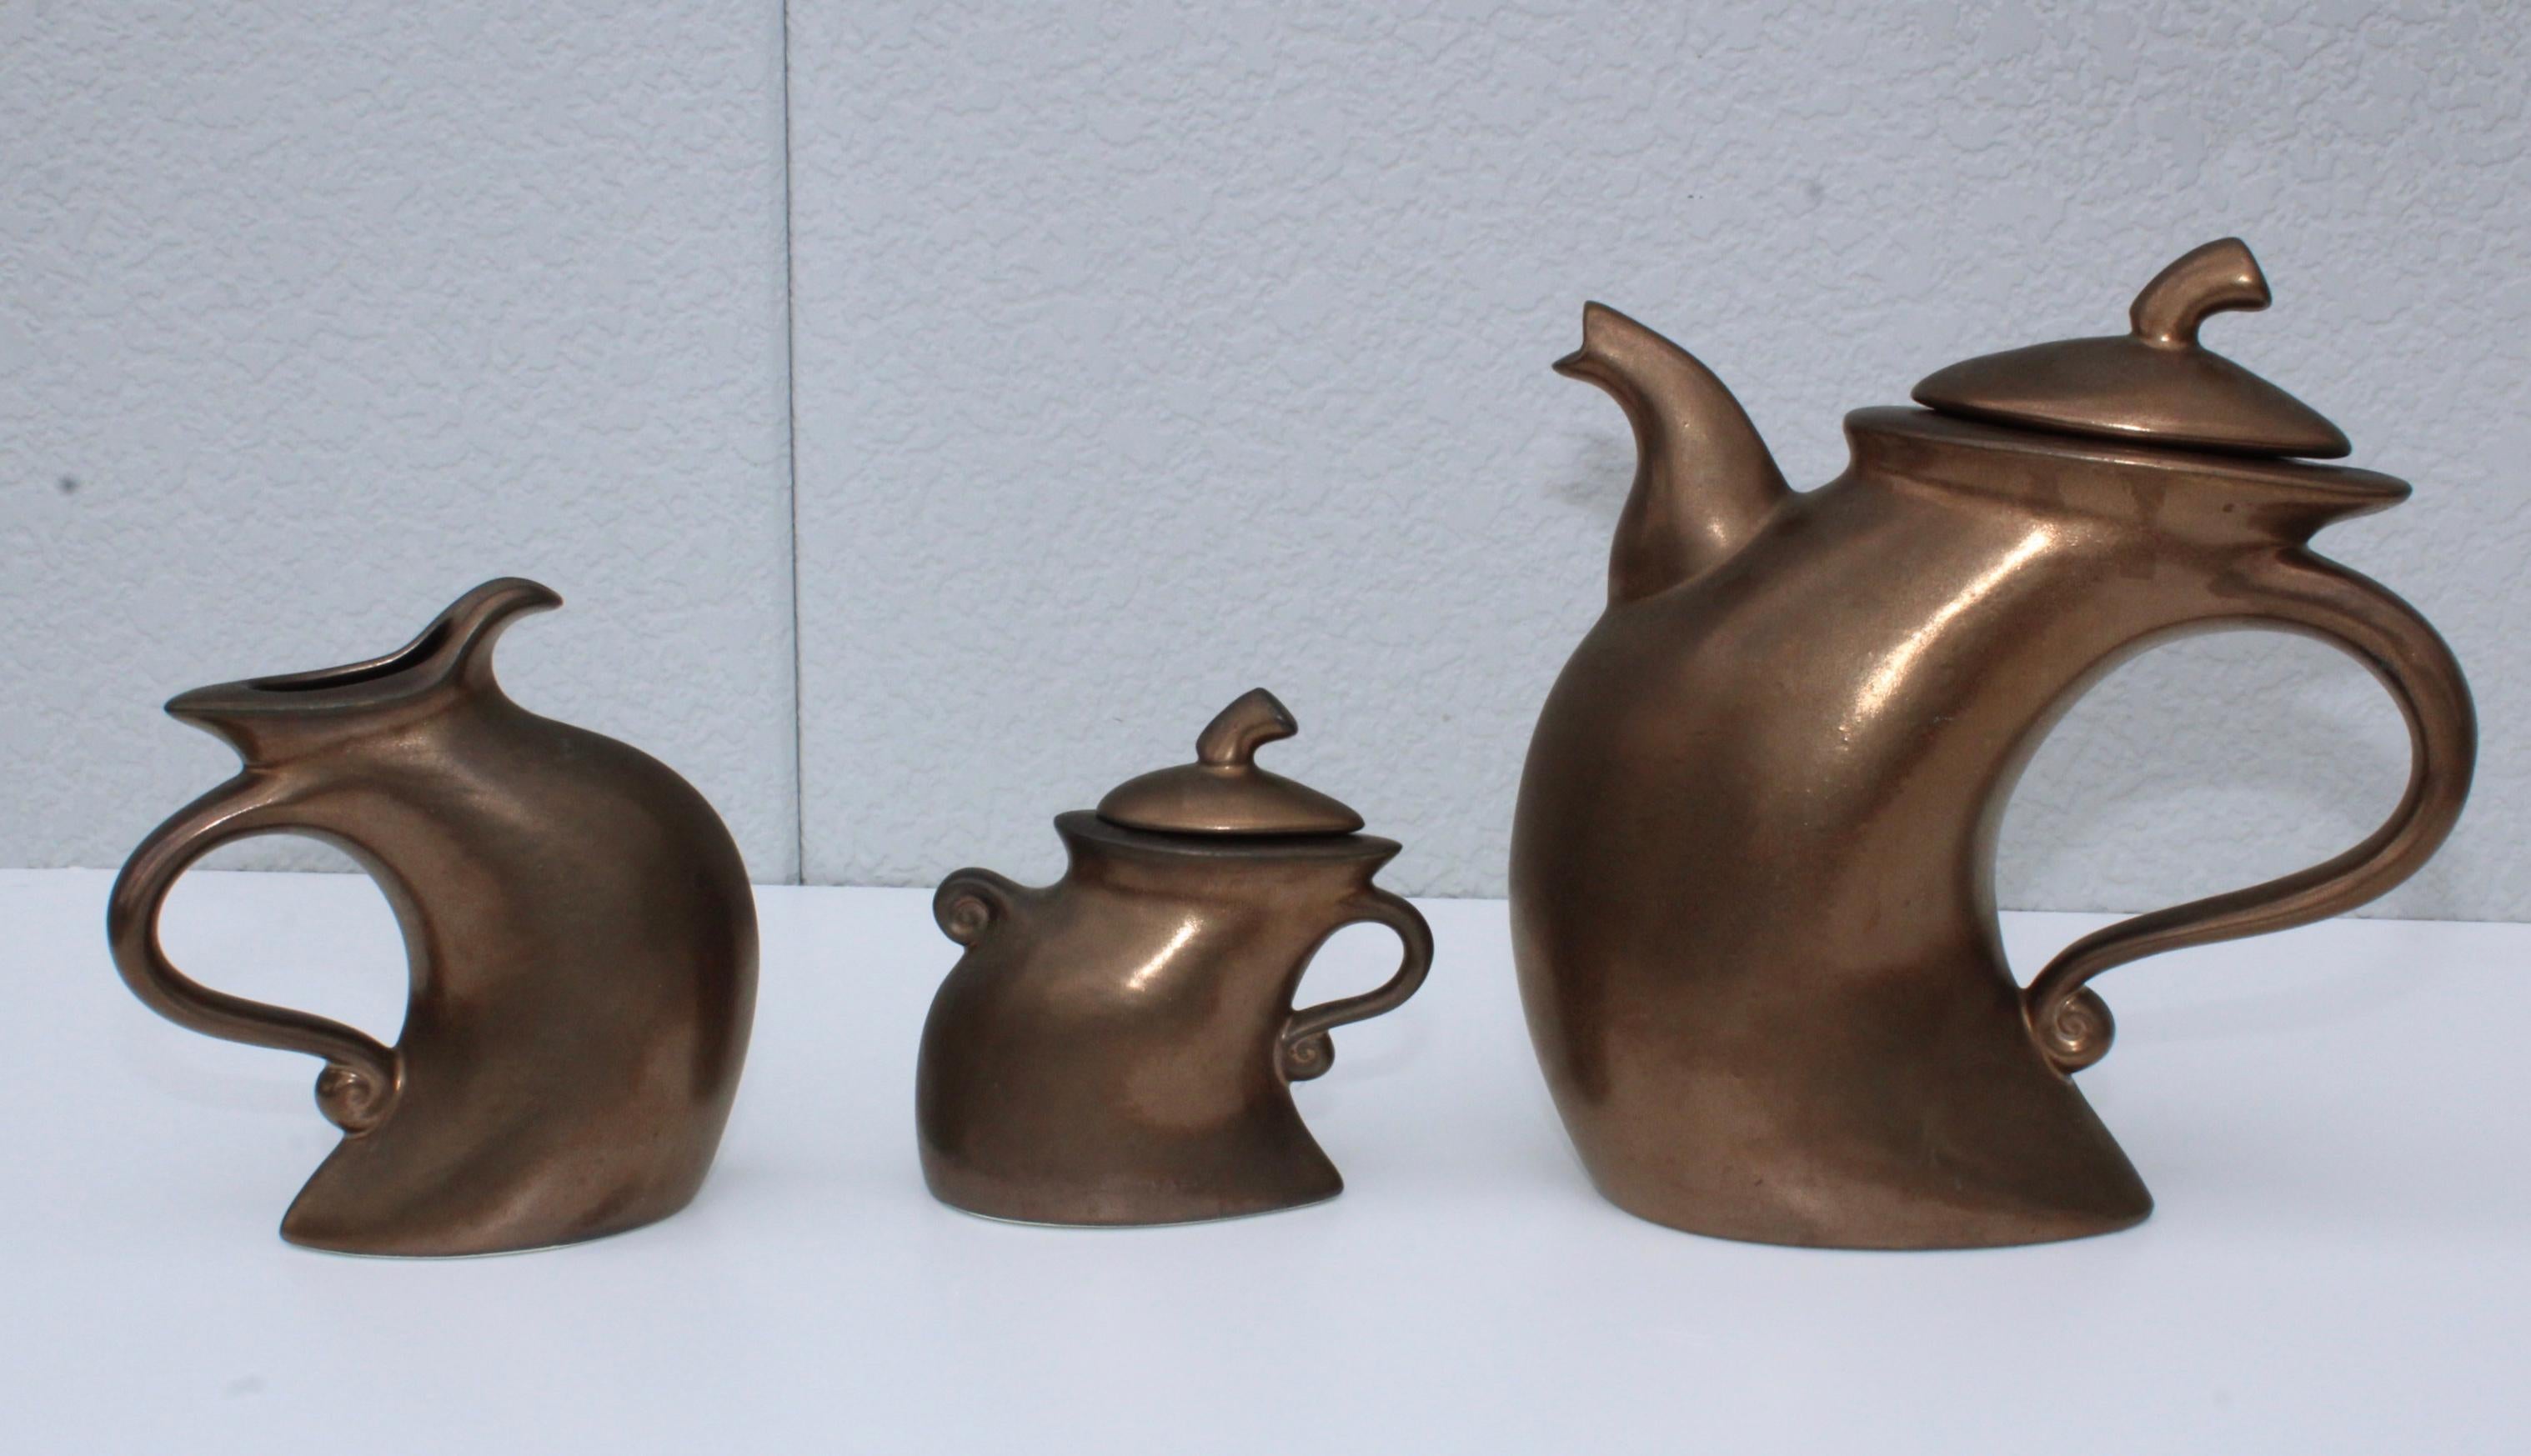 1980's modernist tea set by California ceramist Michael Lambert, in vintage original condition with minor wear and patina due to age and use.

Sugar holder measurements: height 5.5'' depth 2.75'' width 6''
Creamer height 7'' width 7'' depth 3''.